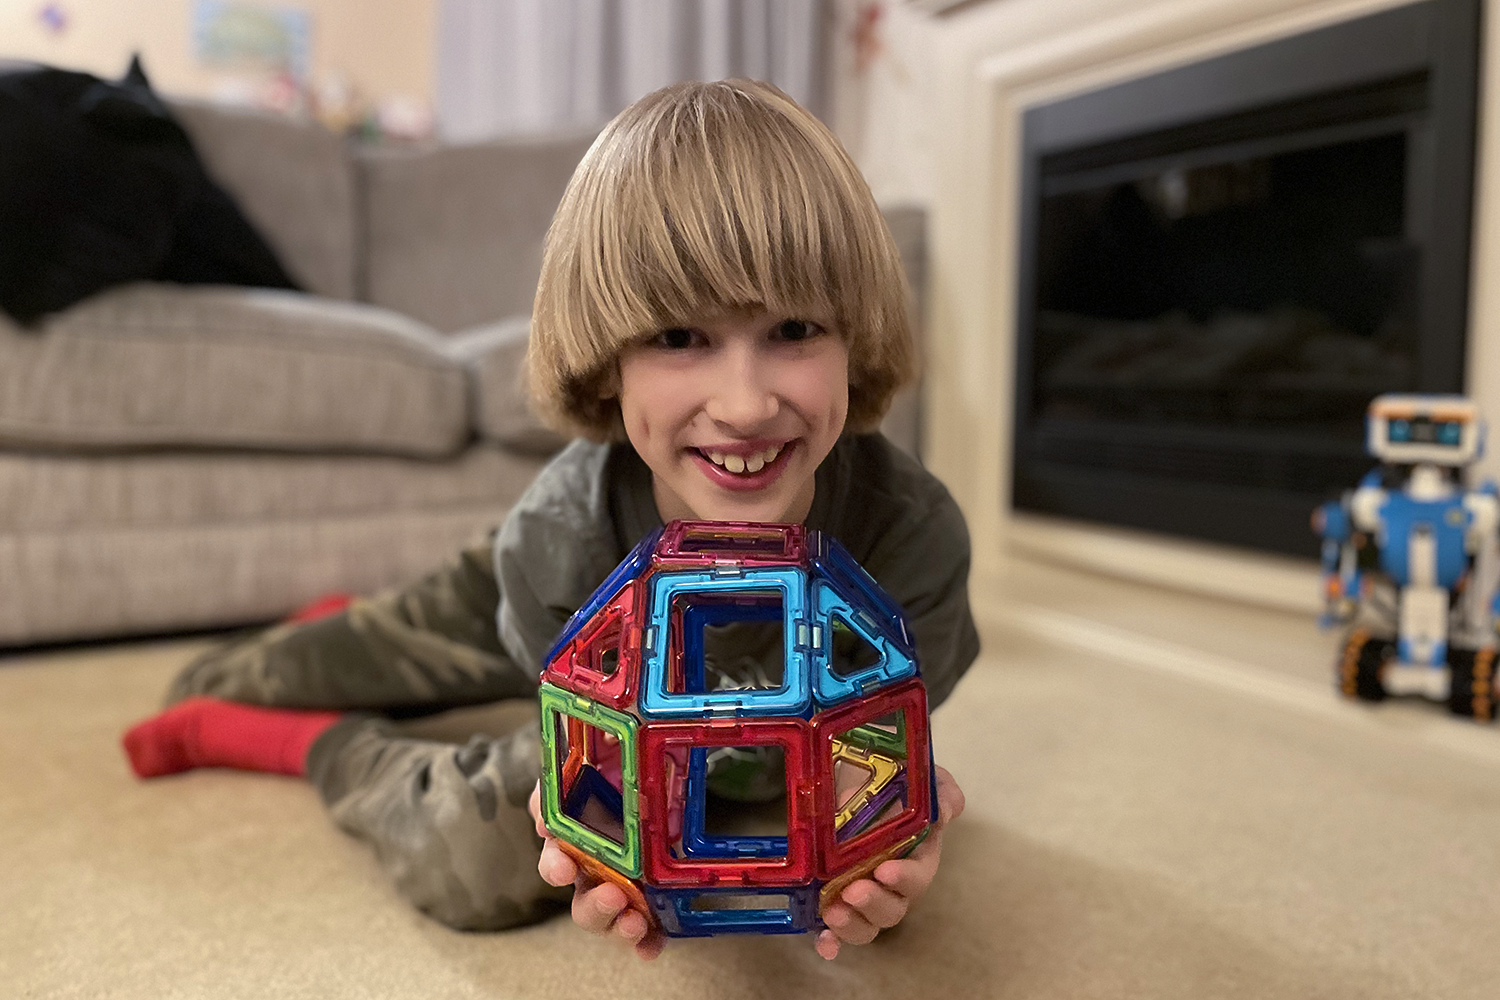 Toby with his MagFormers magnetic tile creation